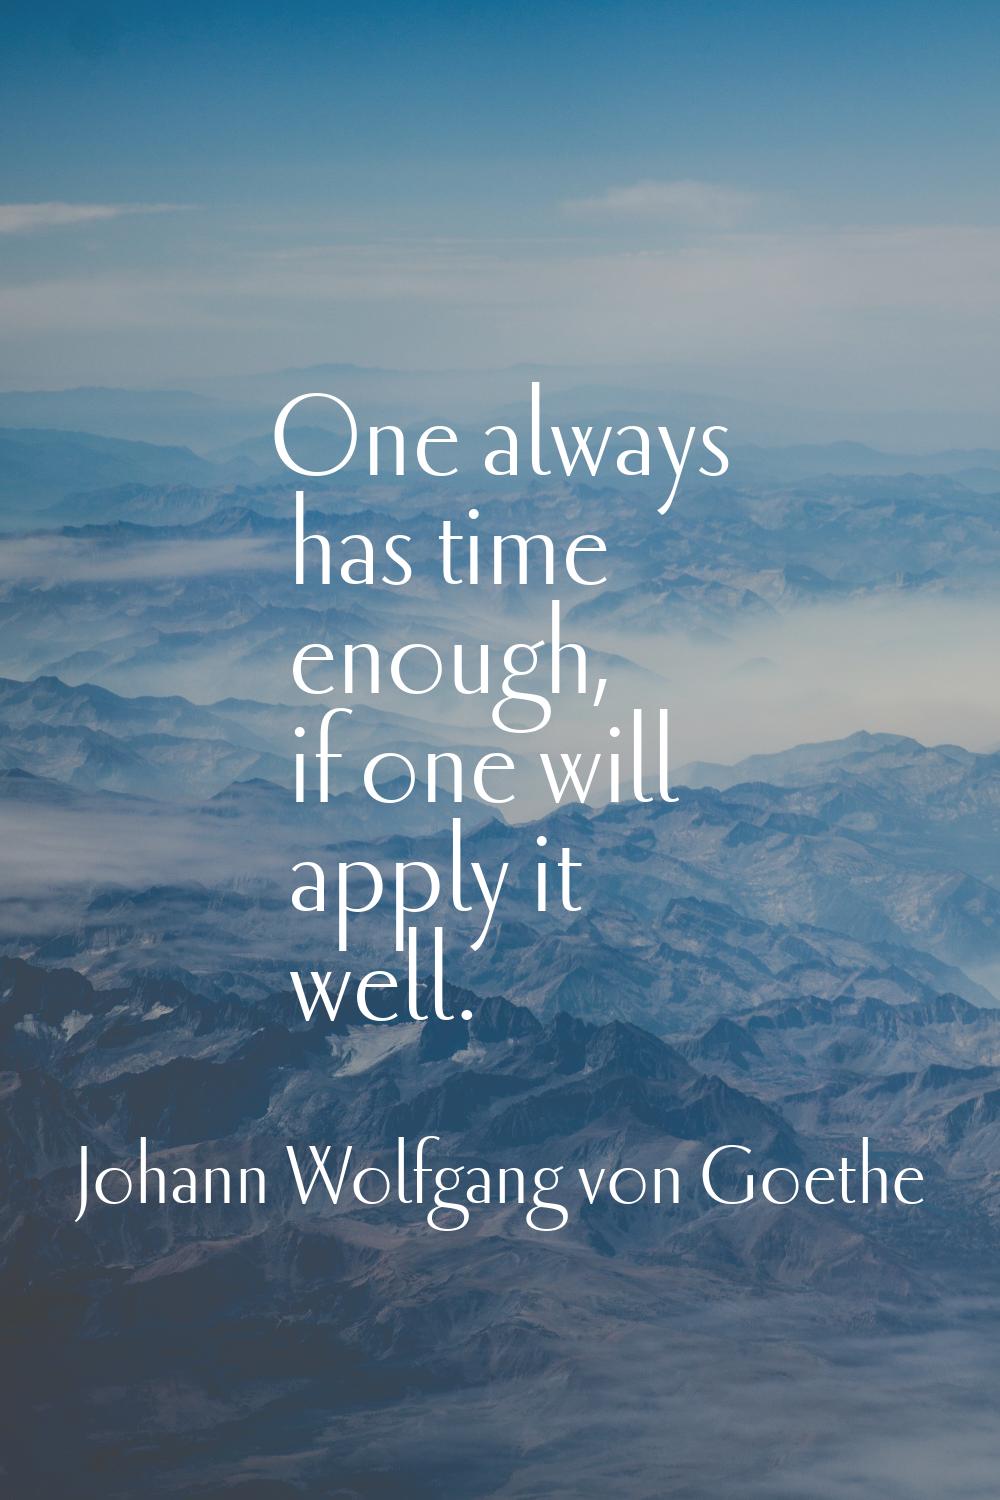 One always has time enough, if one will apply it well.